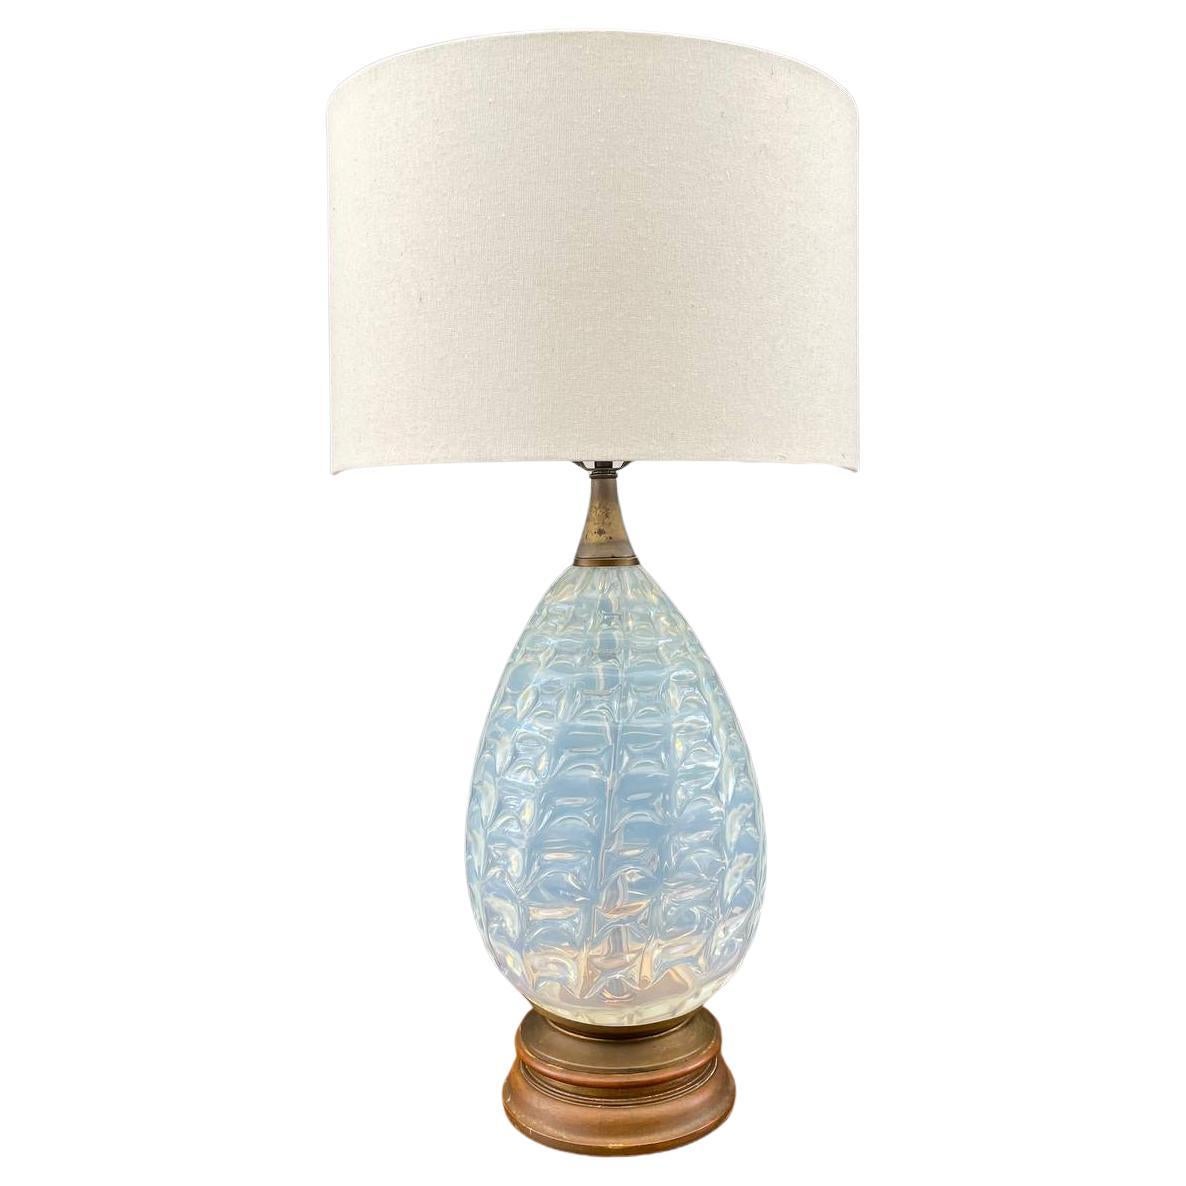 Vintage Italian Murano Glass Table Lamp with Brass Accent